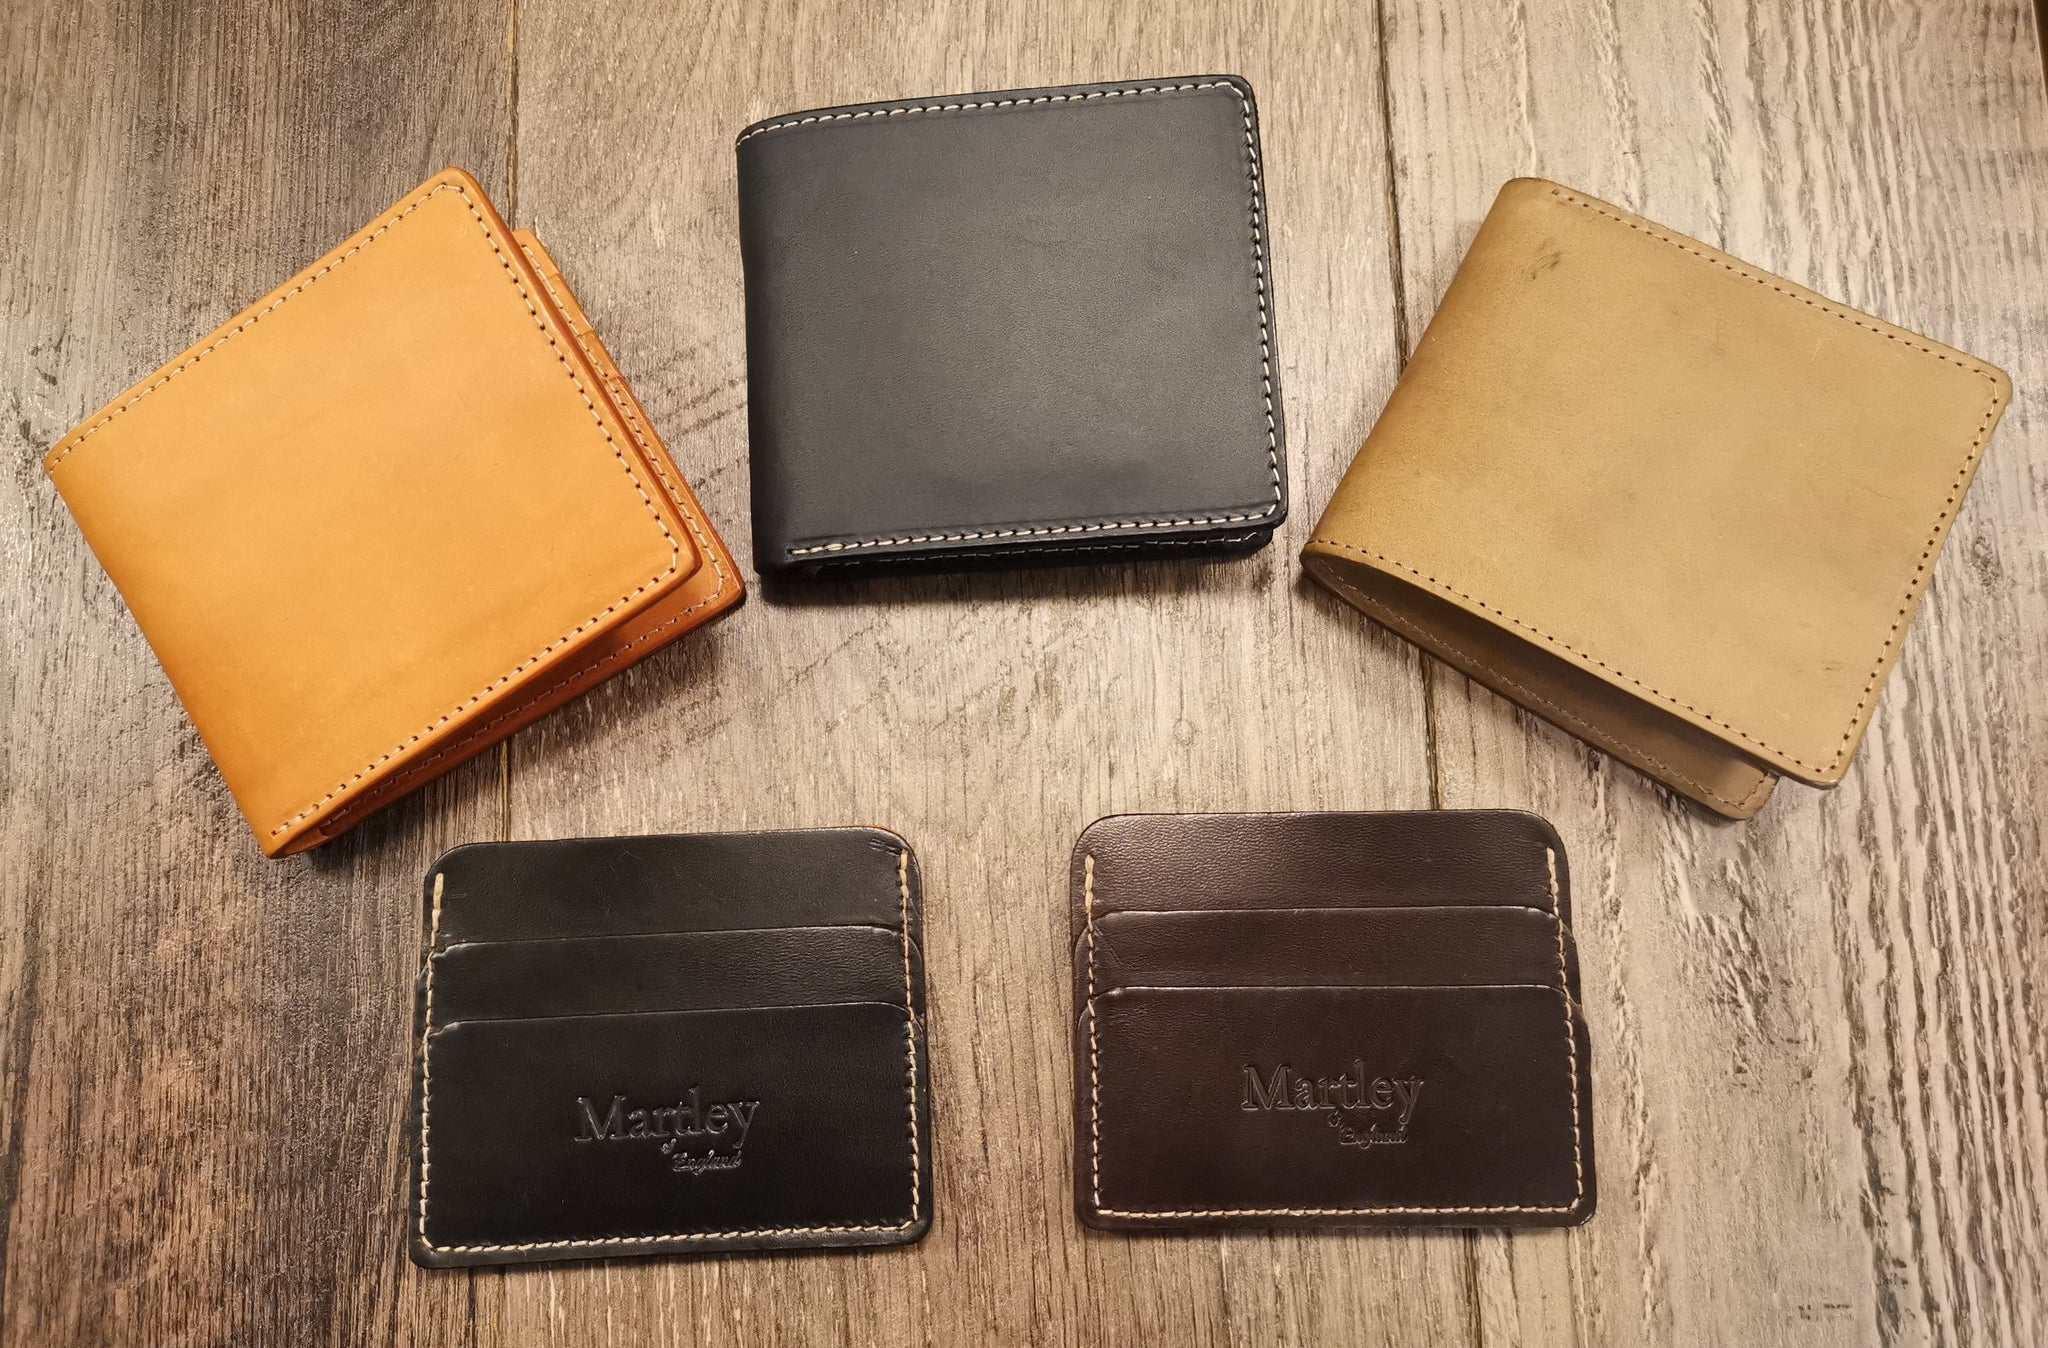 Martley Leather Wallets